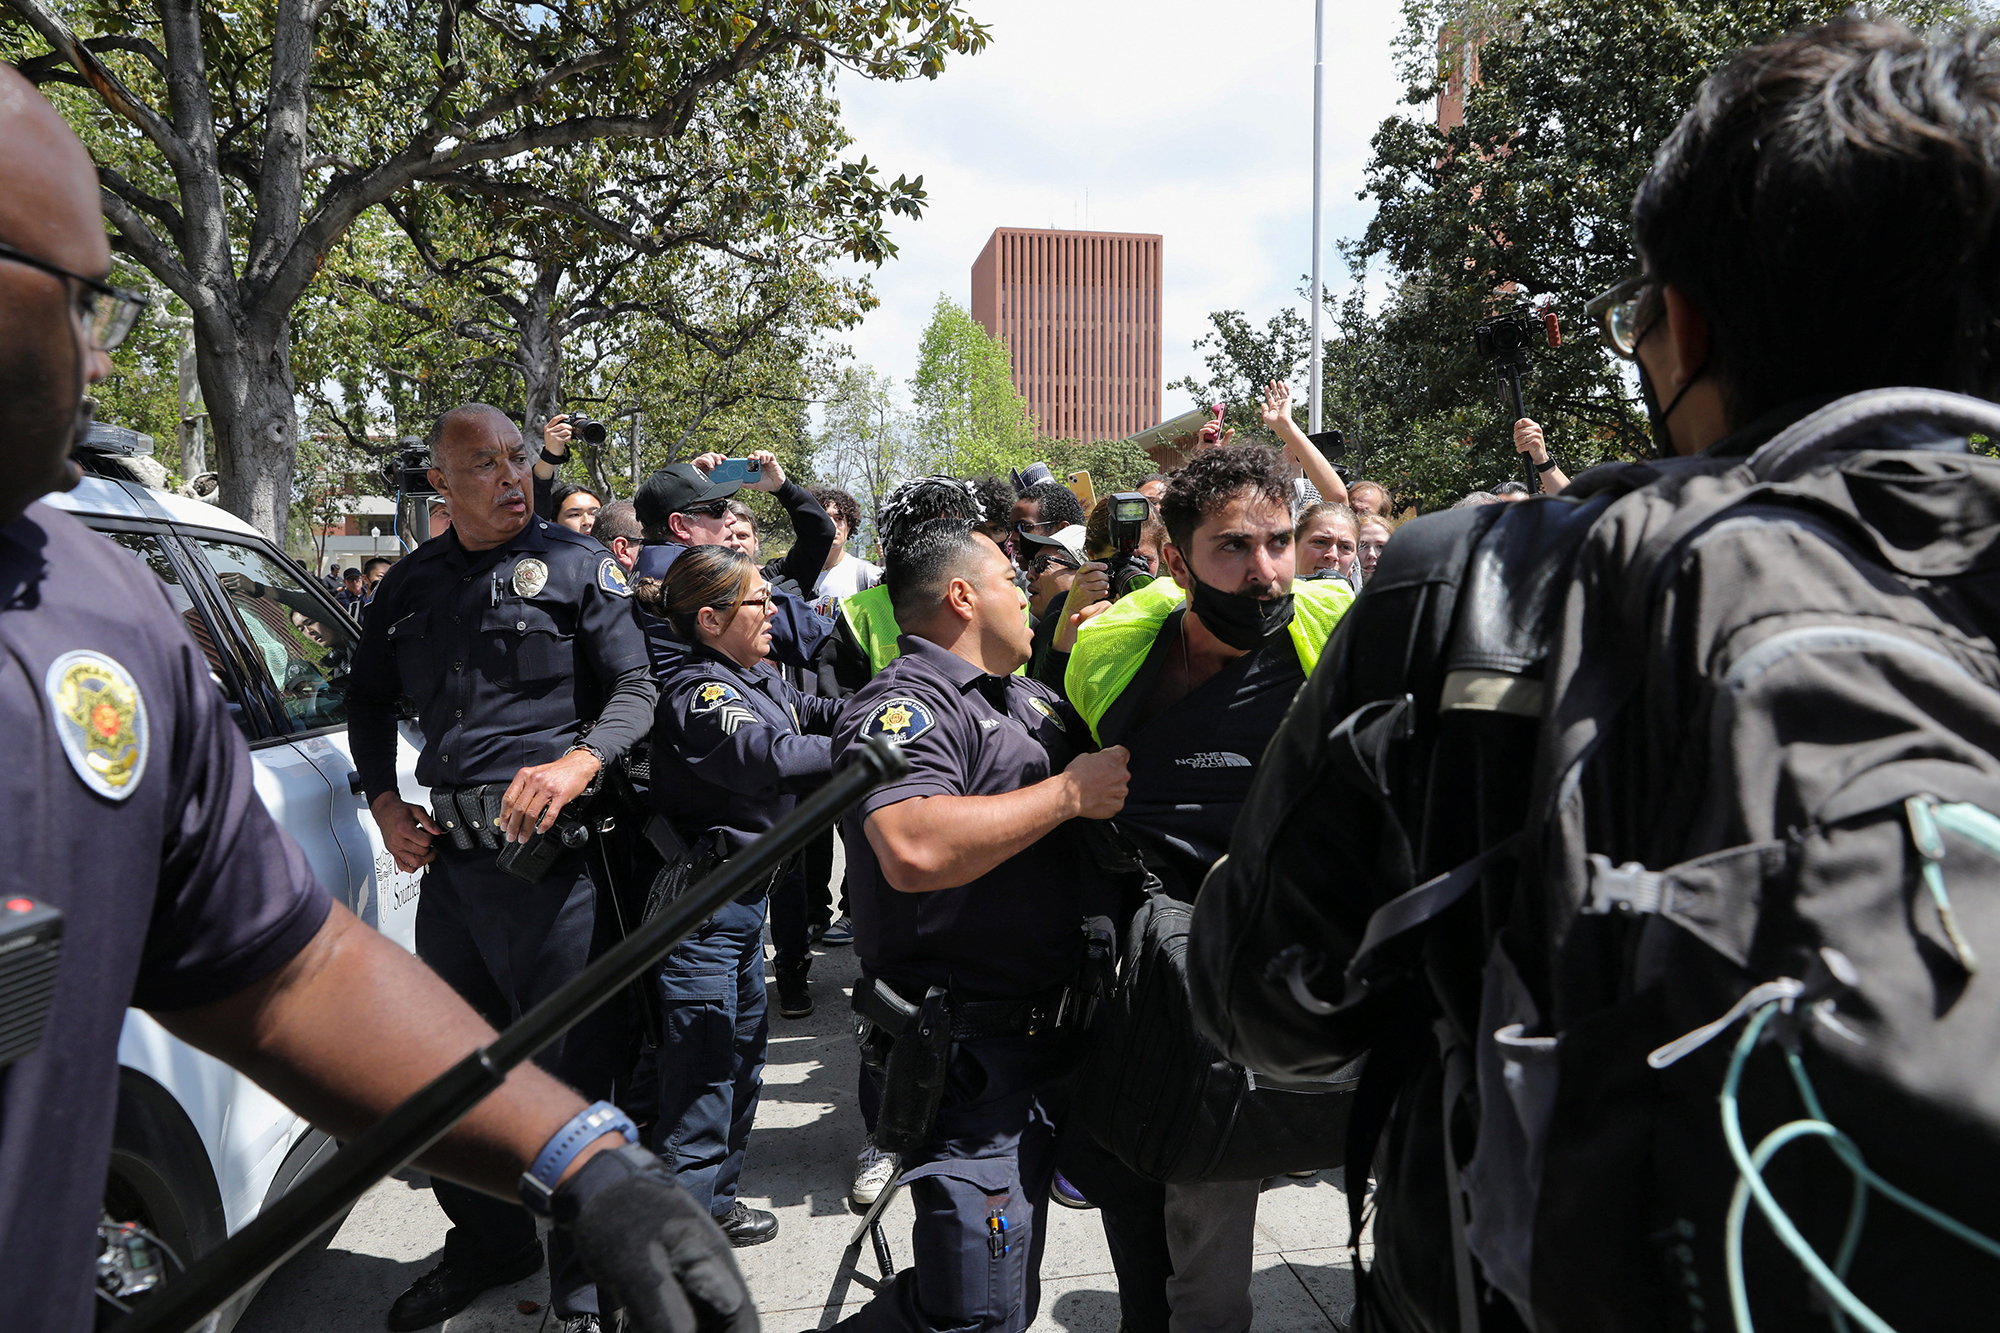 USC Safety officers try to disperse students who protest in support of Palestinians, at the University of Southern California's Alumni Park in Los Angeles, California, on April 24.